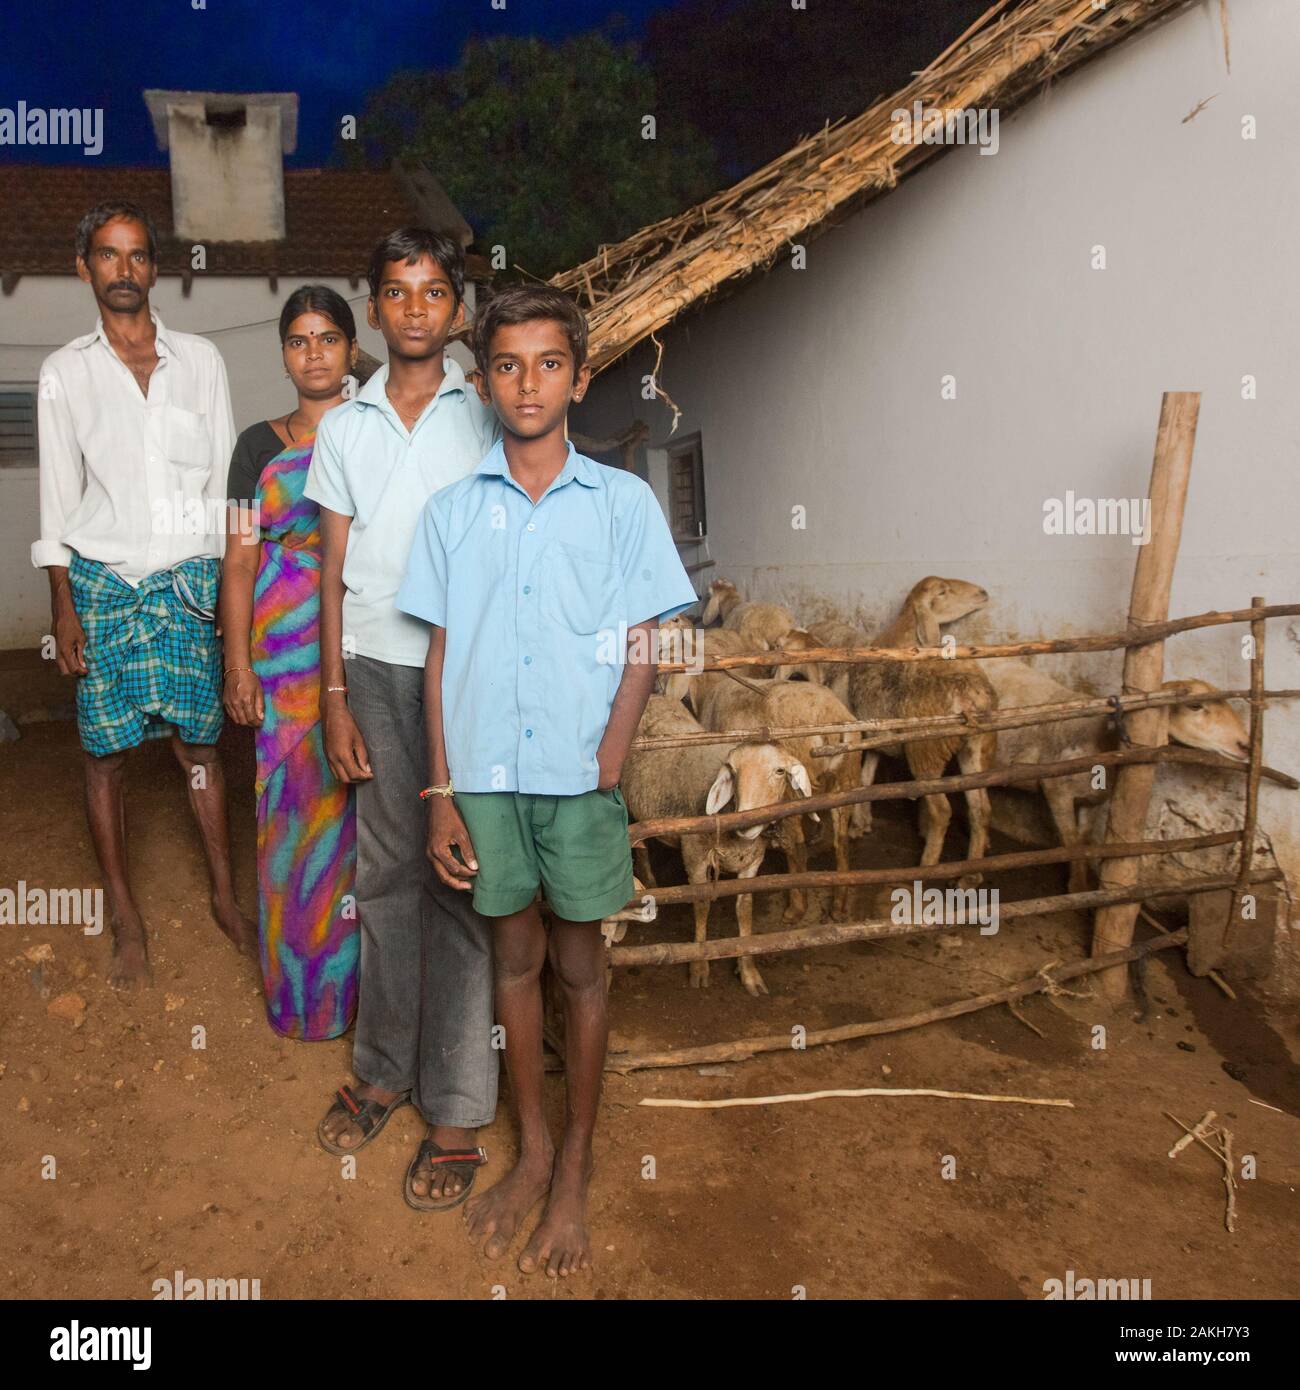 CAPTION: Following an accident, Pradeep (pictured, front) had to have his hand amputated. In order to ensure he'd be able to meet the costs associated Stock Photo